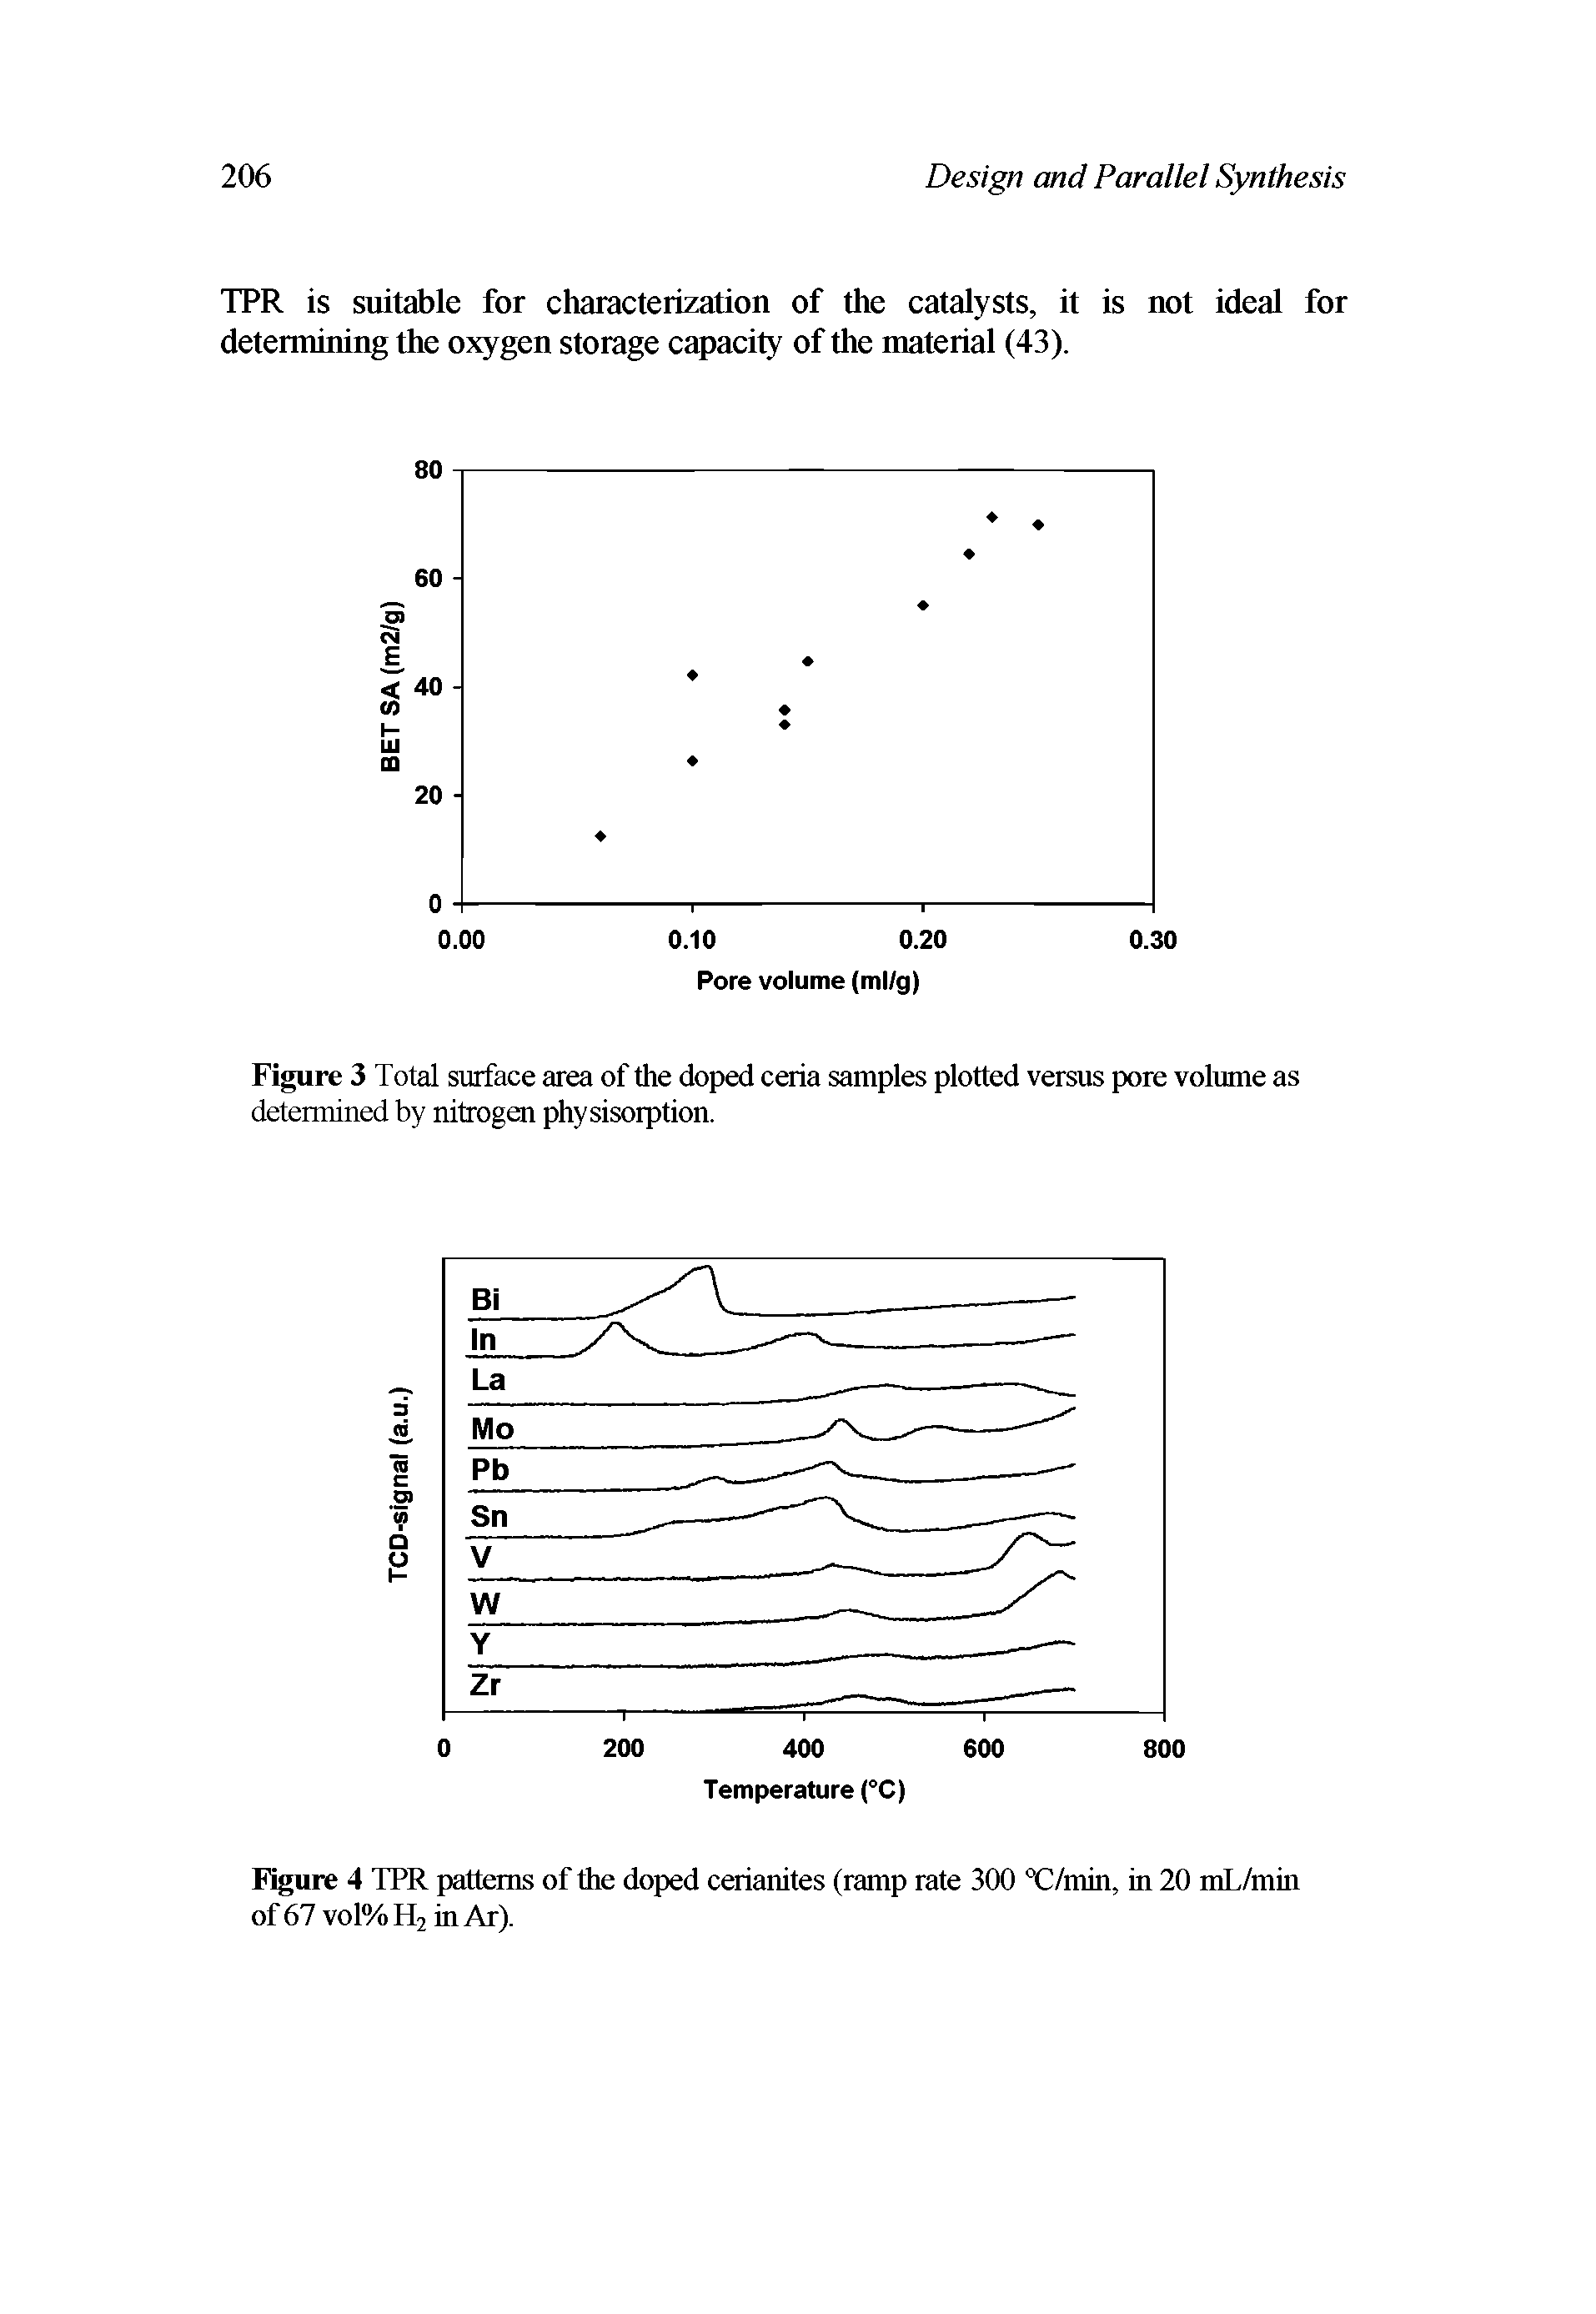 Figure 3 Total surface area of the doped ceria samples plotted versus pore volume as determined by nitrogen physisorption.